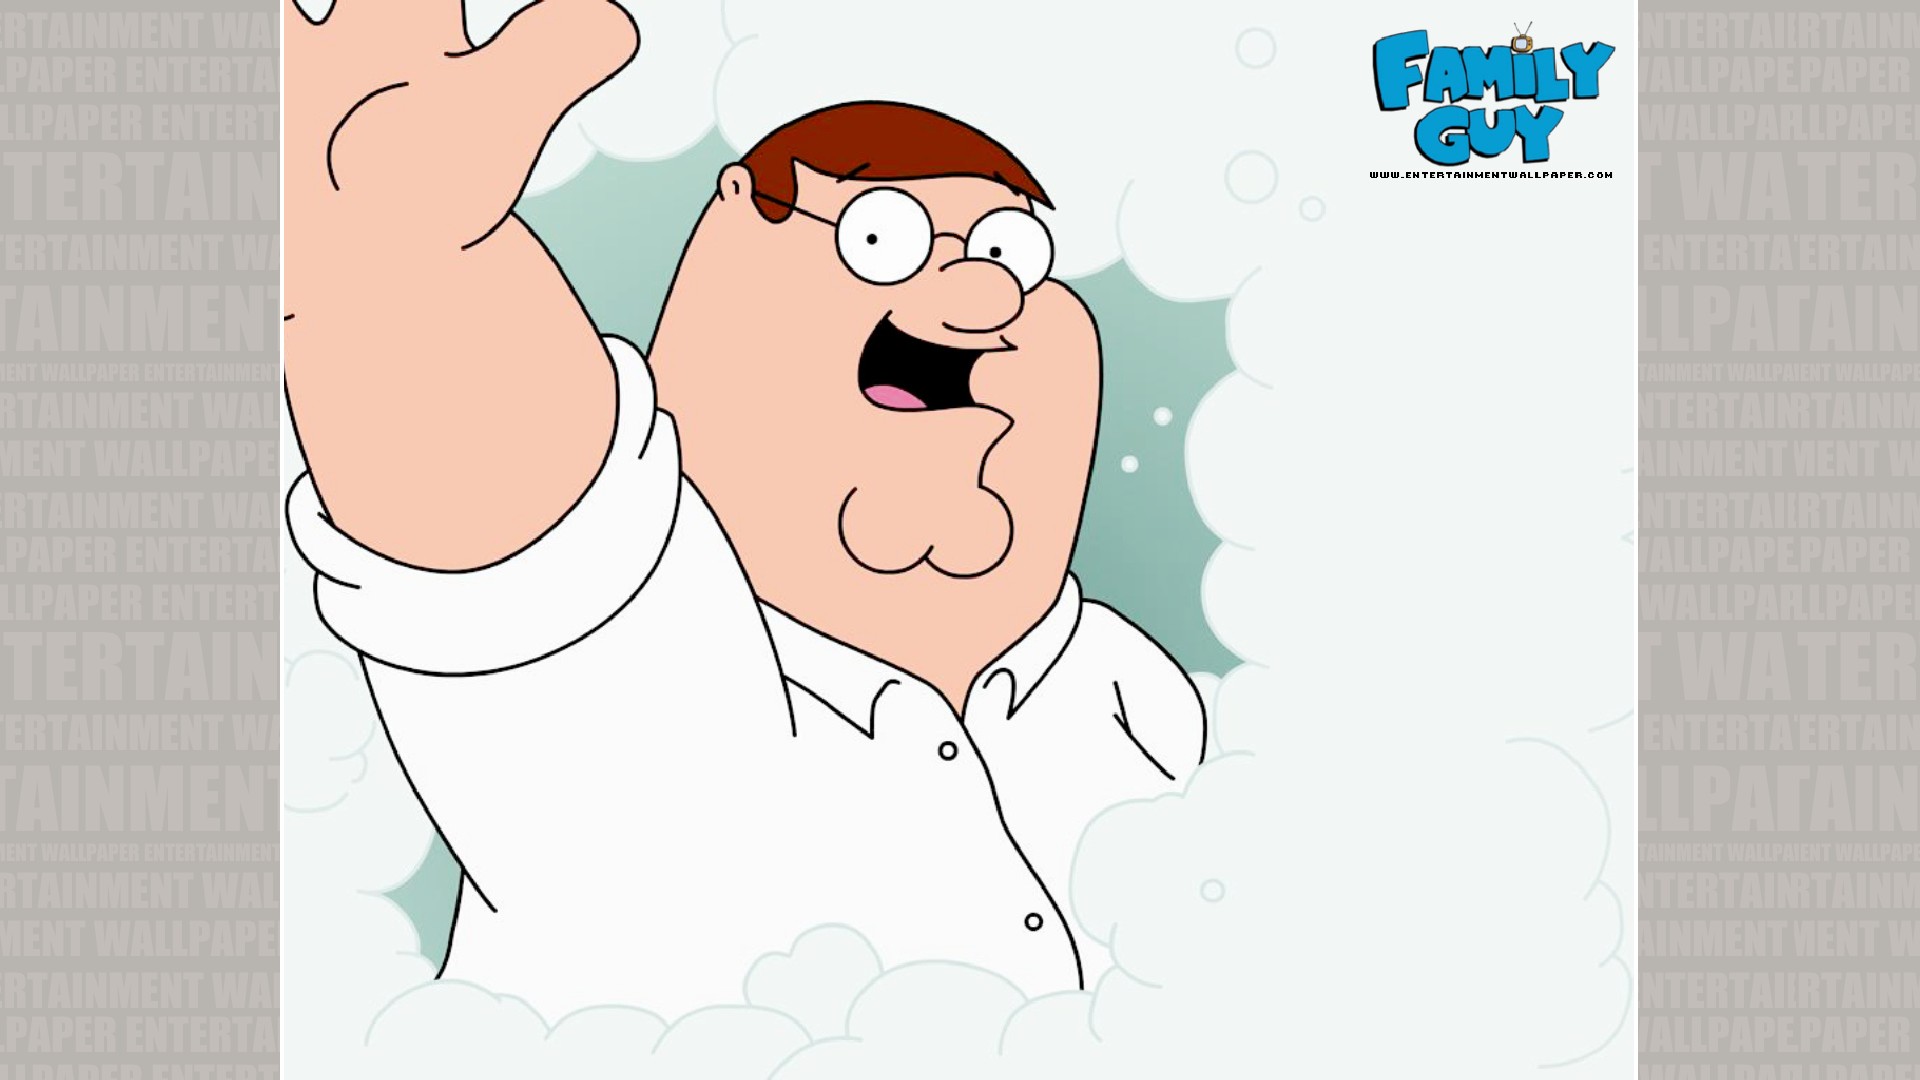 Amazing Wallpaper Sites Image Title Family Guy